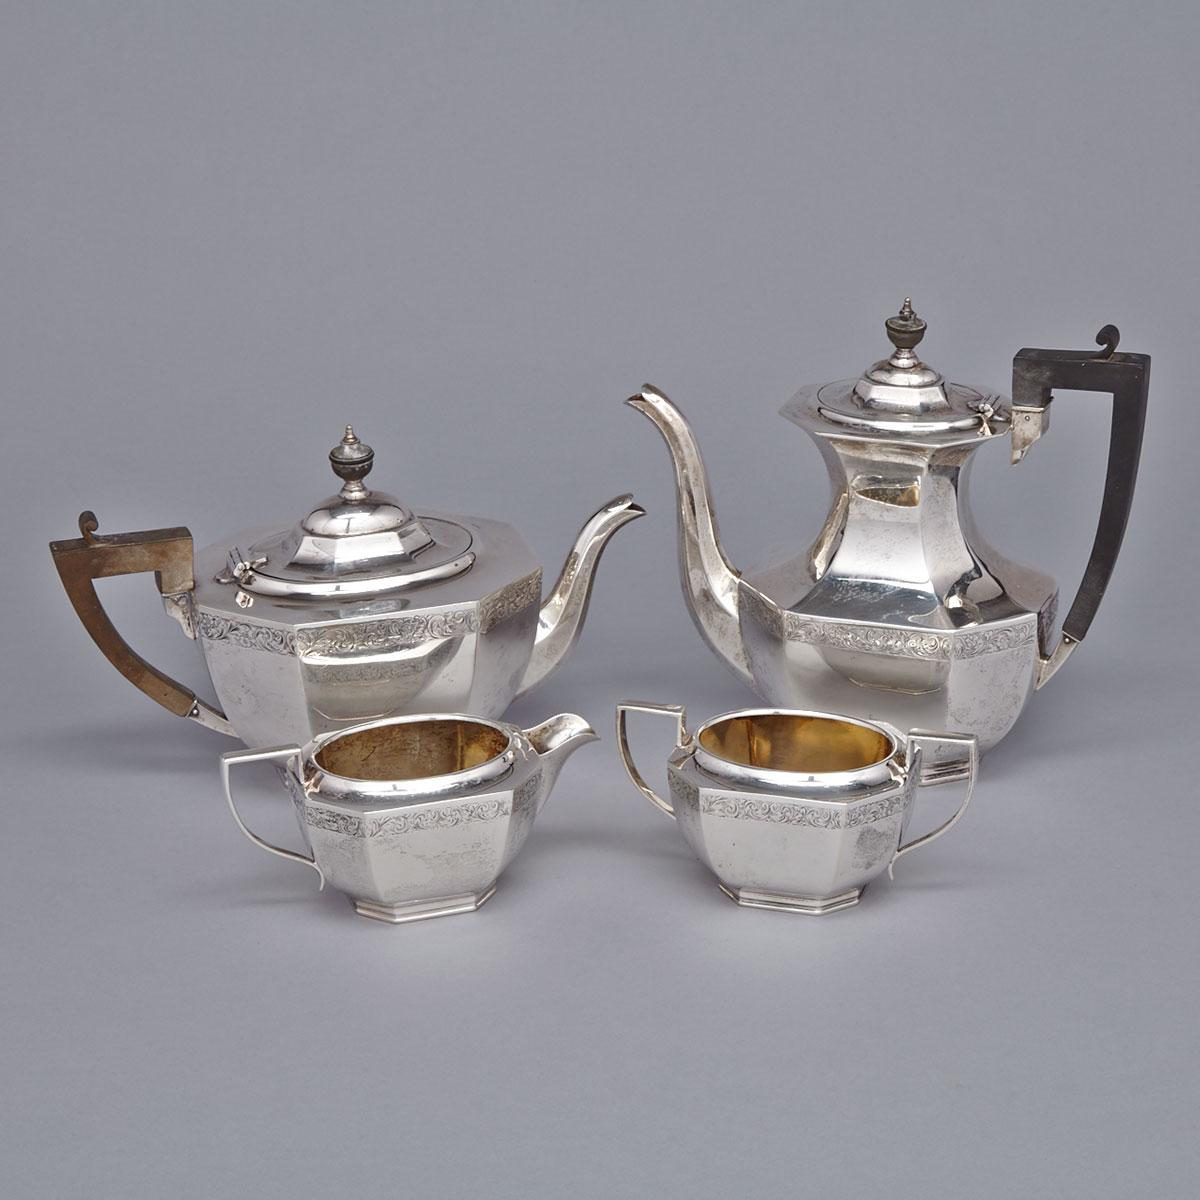 Canadian Silver Tea and Coffee Service, Henry Birks & Sons, Montreal, Que., 1927/28